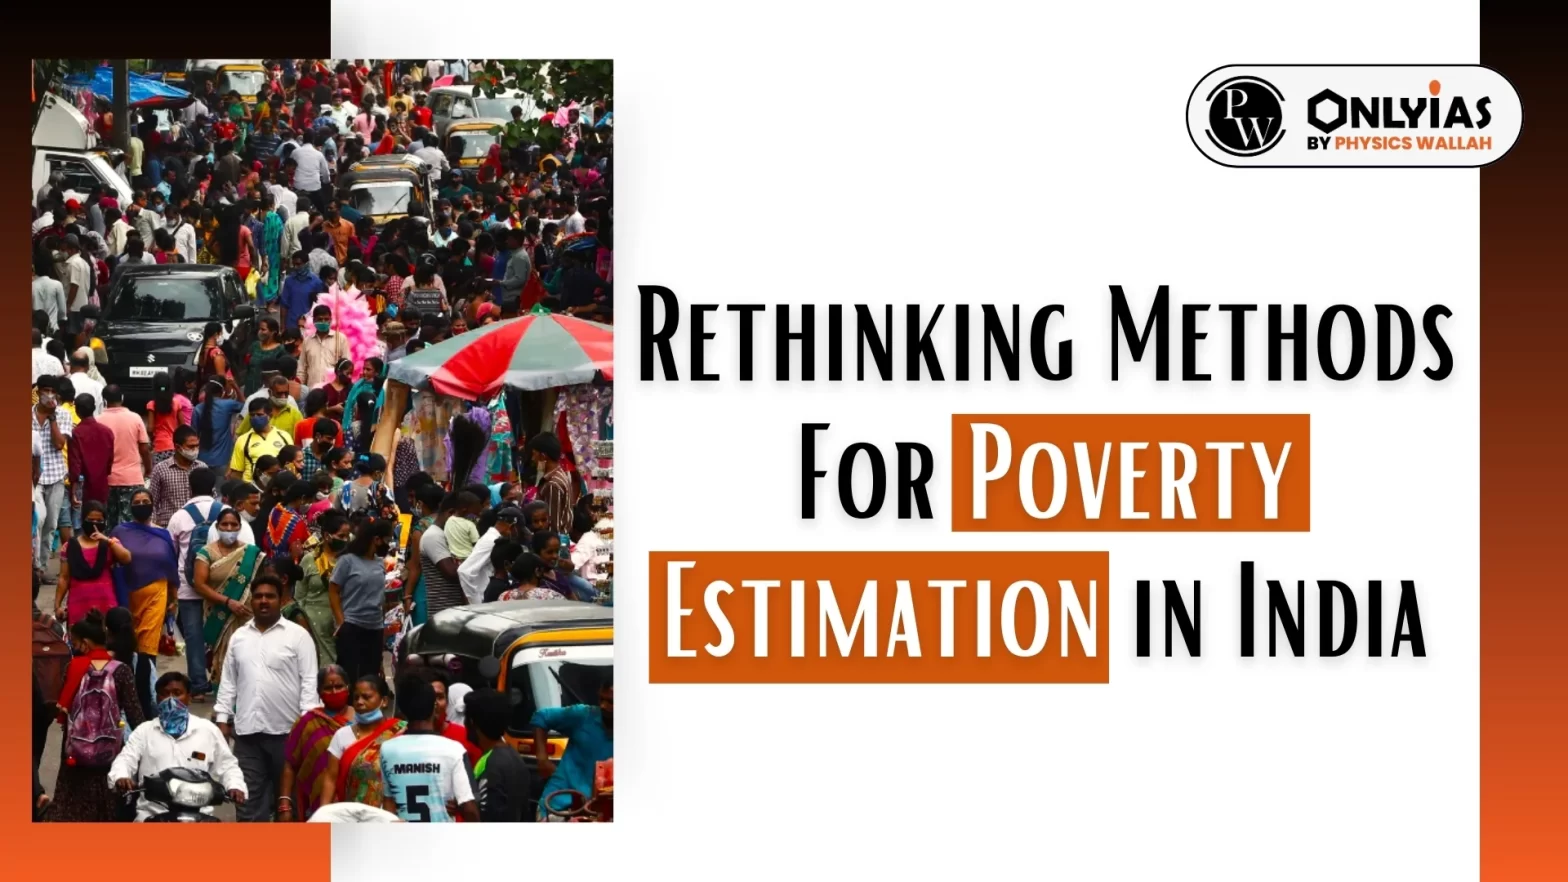 Rethinking Methods For Poverty Estimation in India